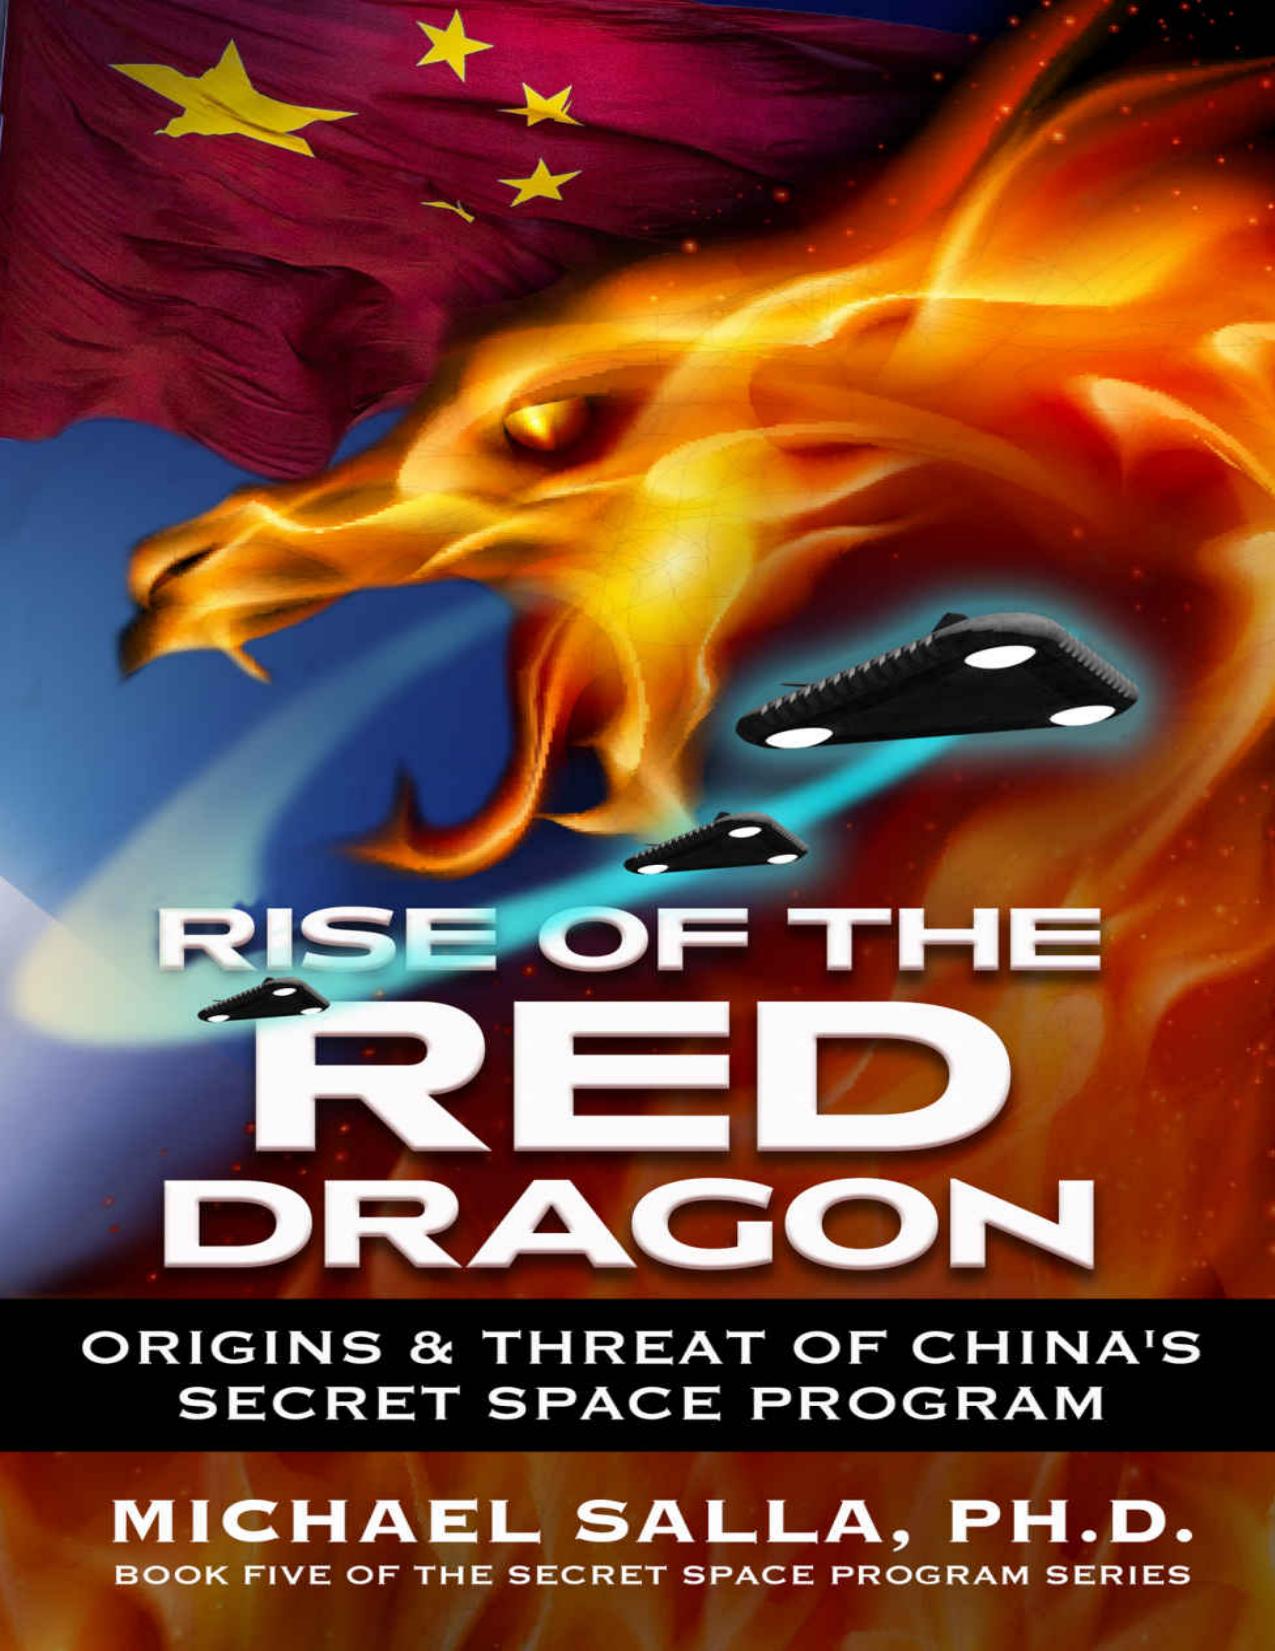 Rise of the Red Dragon - Origins & Threat of China's Secret Space Program (Secret Space Programs Book 5) by Michael Salla